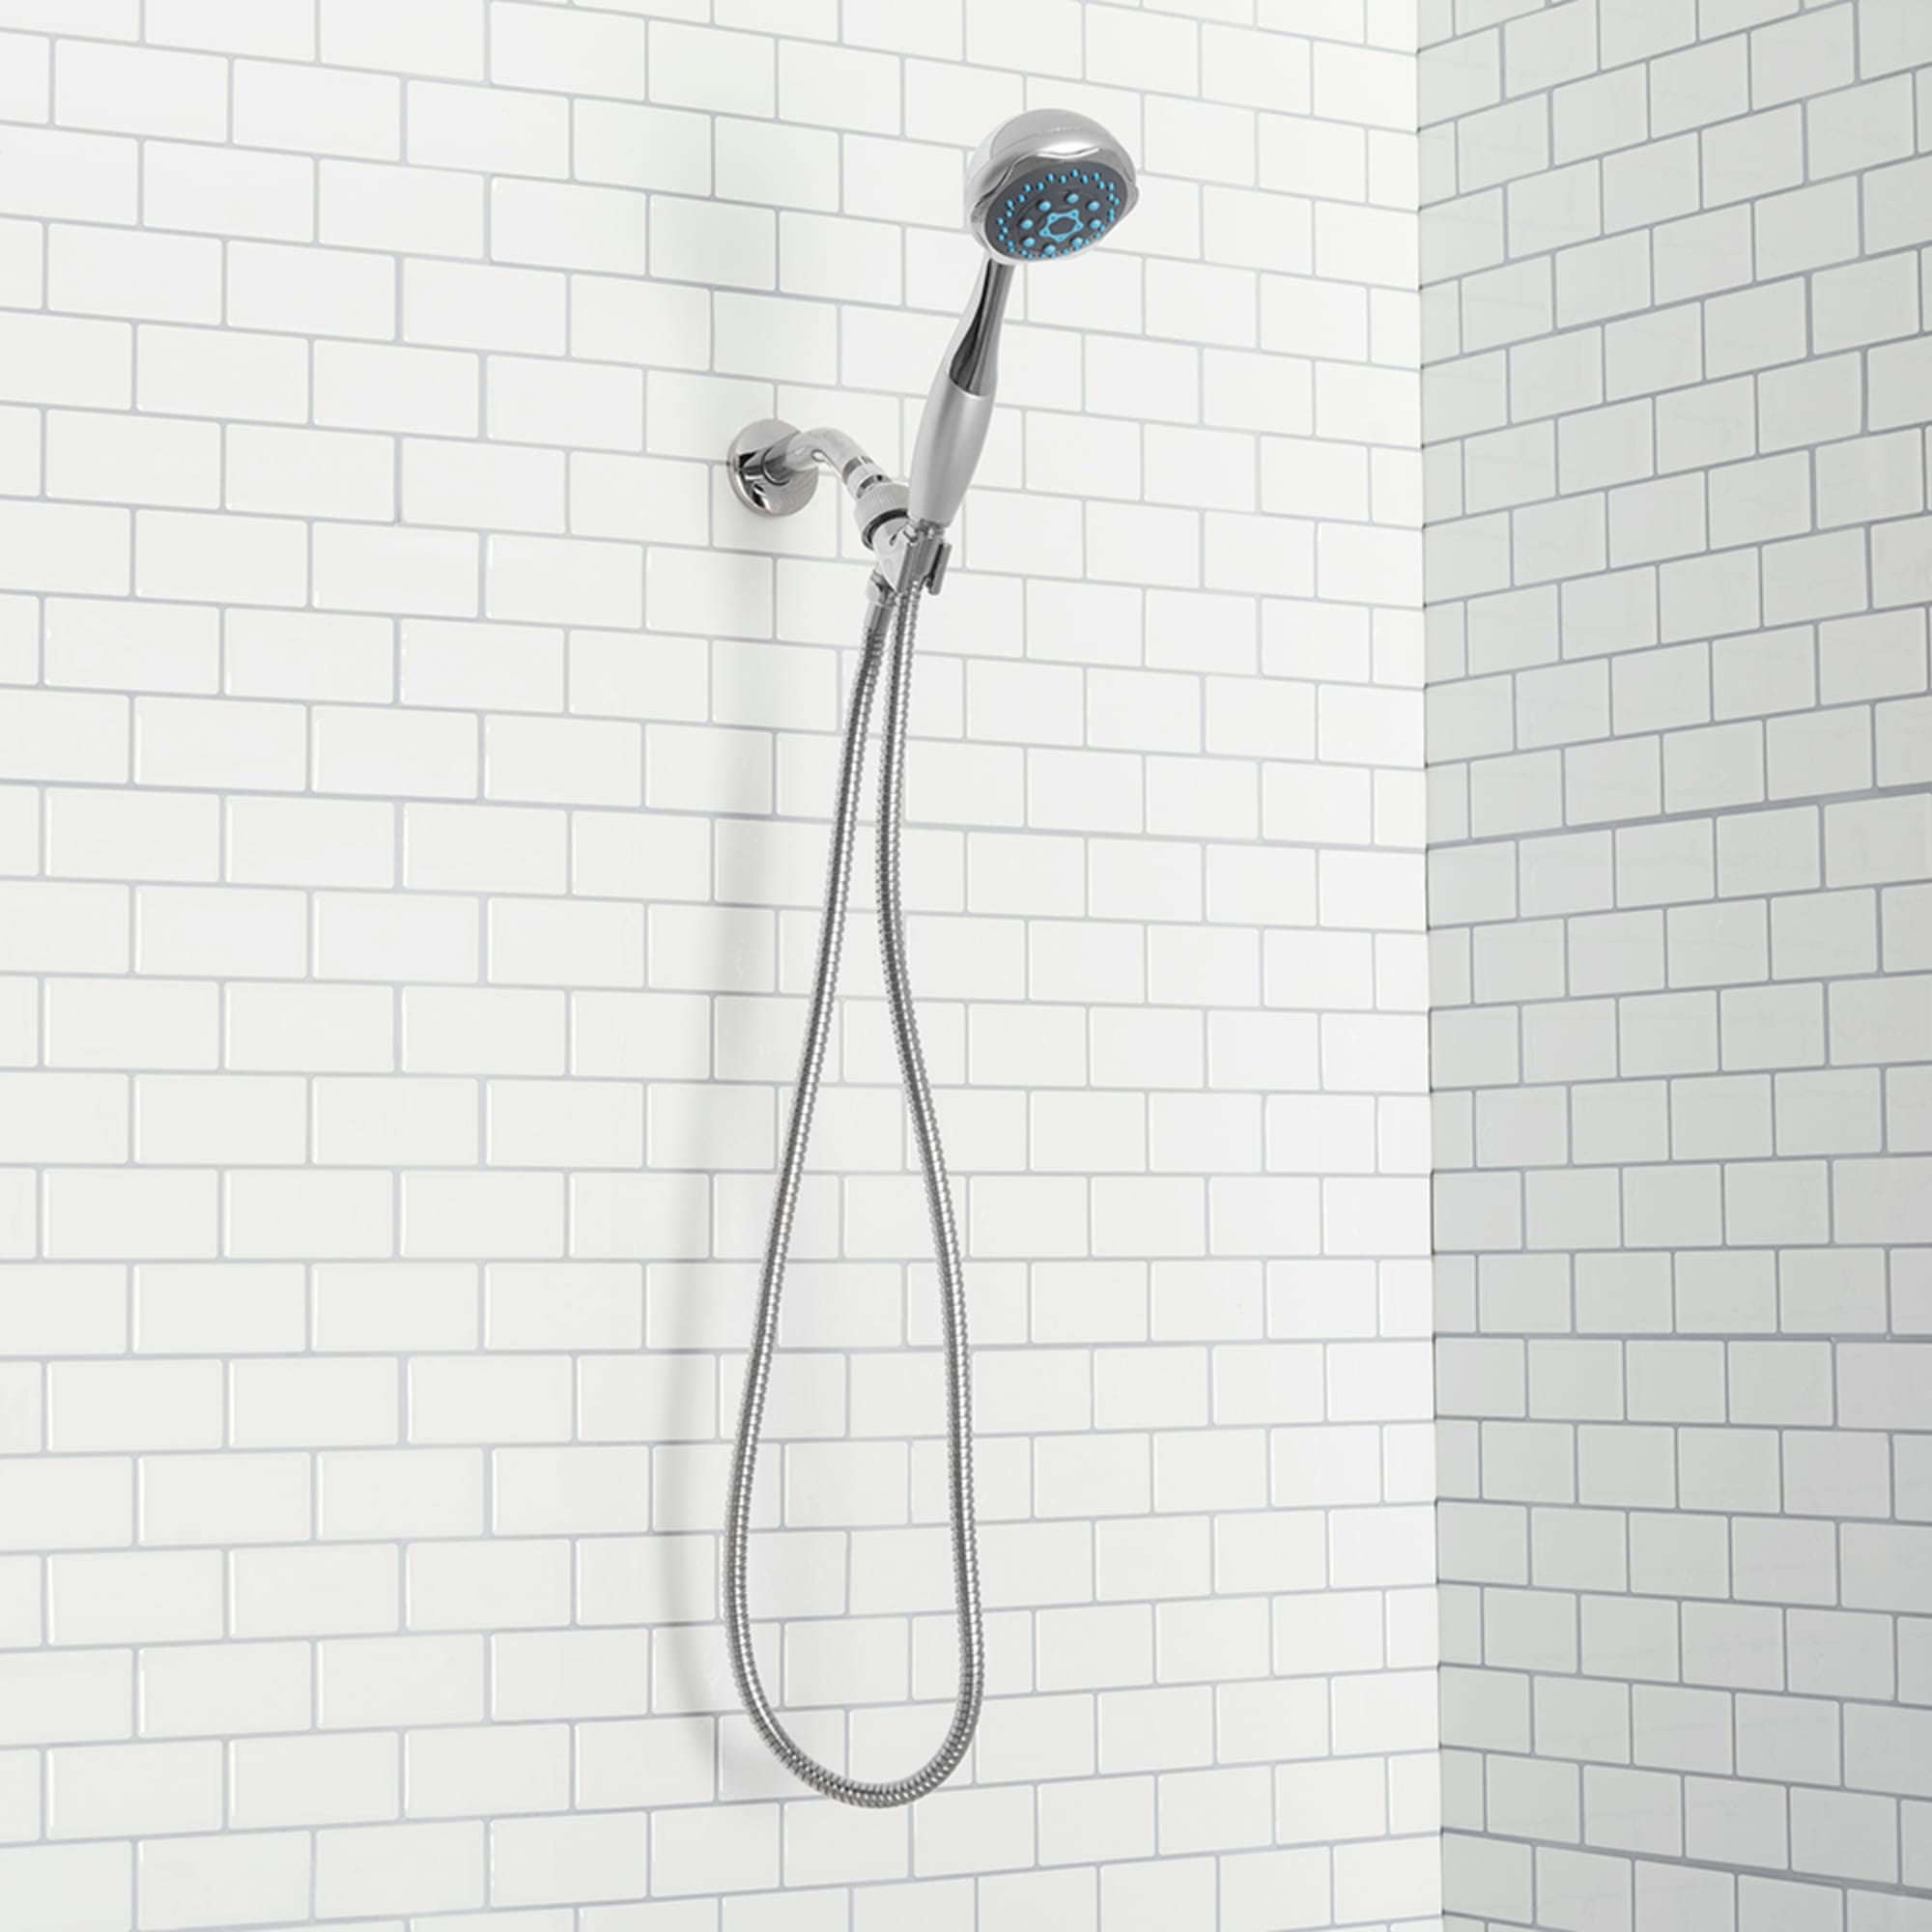 Home Basics Deluxe Handheld 5 Function Shower Massager with 5 FT. Hose, Chrome $12.00 EACH, CASE PACK OF 12